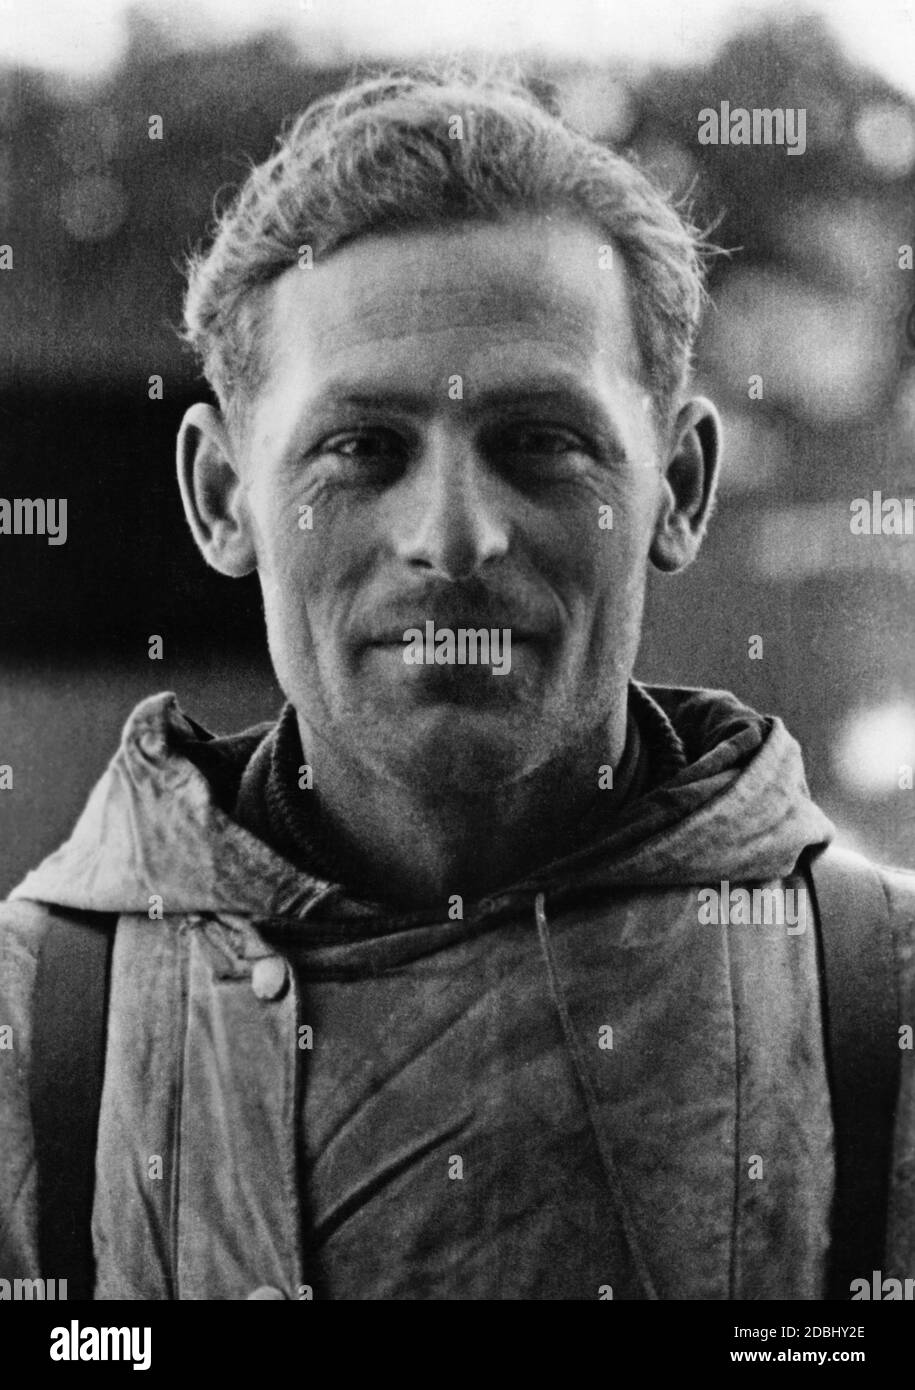 Lieutenant Albert Ernst, 1./schw. Pz.J.Abt. 519, with the Knight's Cross, 1944. The date indicates the bestowal date. Stock Photo